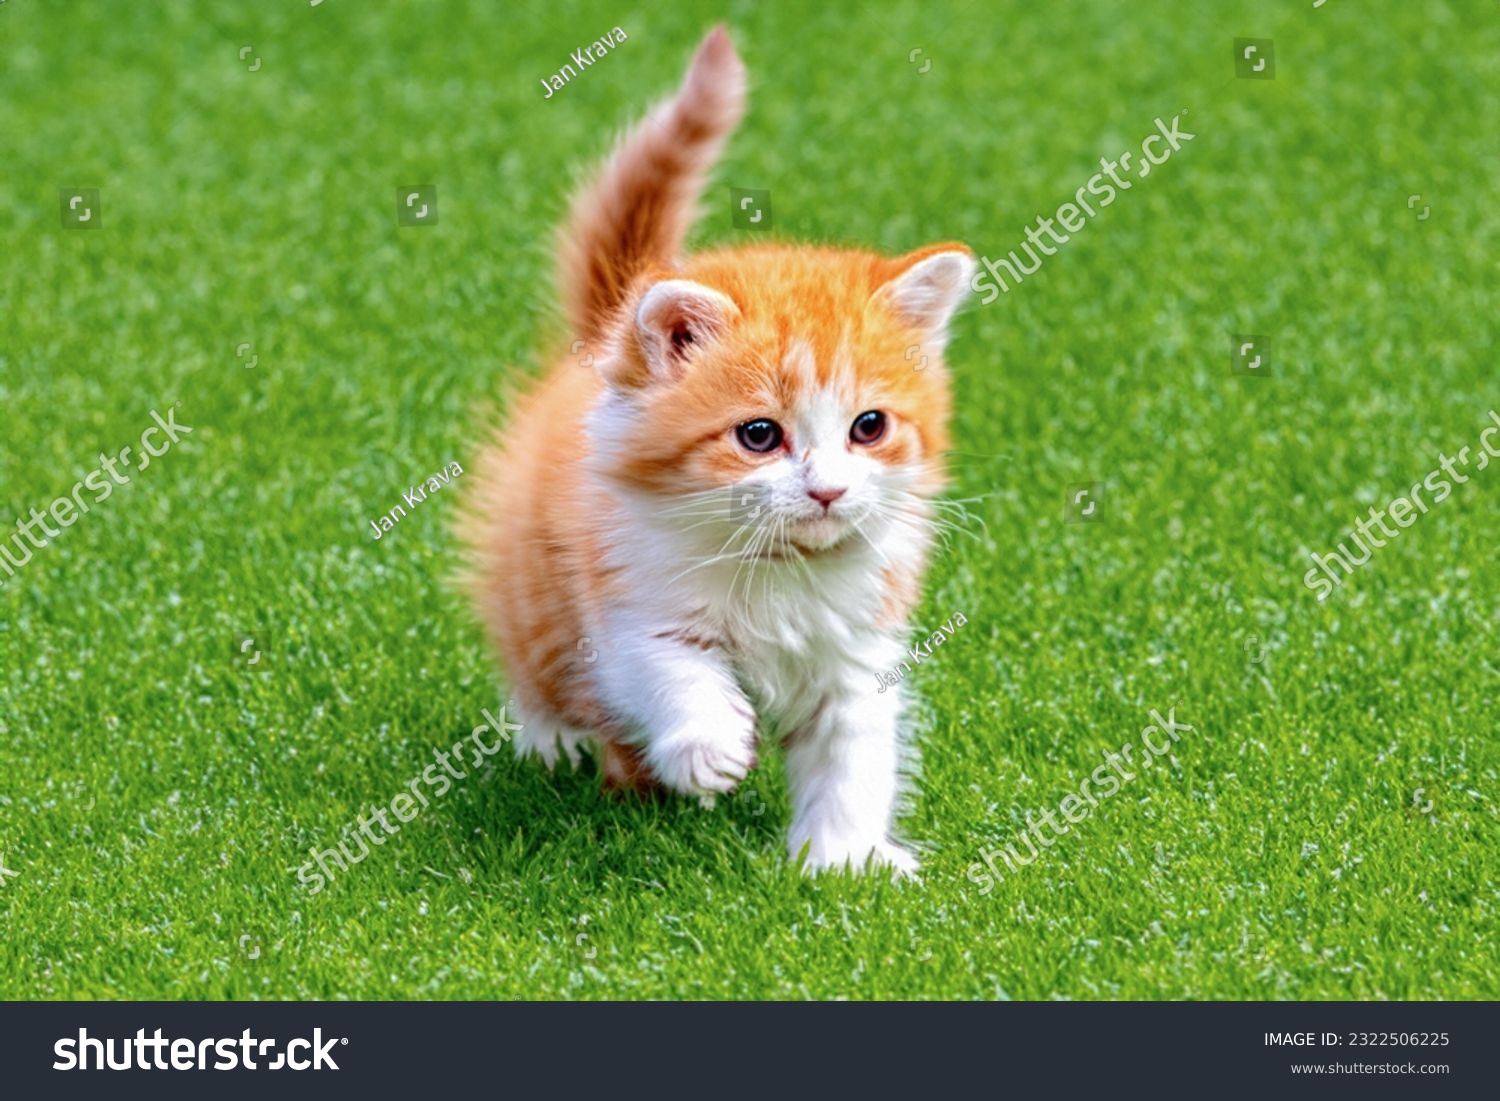 A small kitten on a green lawn. A small kitten is sitting on a green lawn. Copy space, side view #2322506225